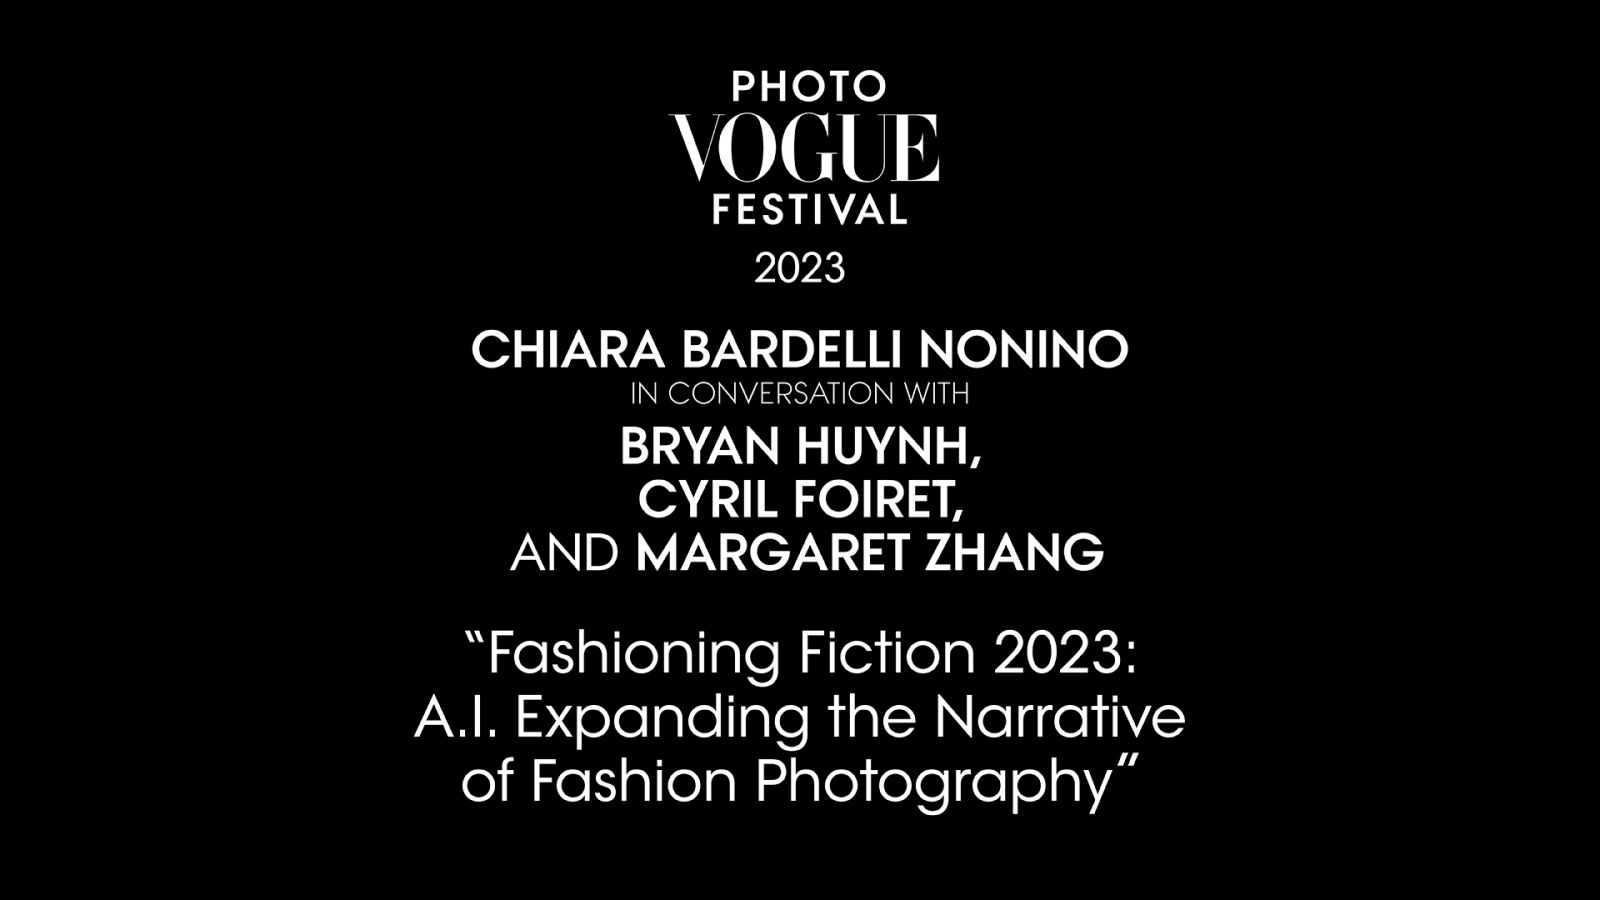 Fashioning Fiction 2023: A.I. Expanding the Narrative of Fashion Photography | PhotoVogue Festival 2023: What Makes Us Human? Image in the Age of A.I.